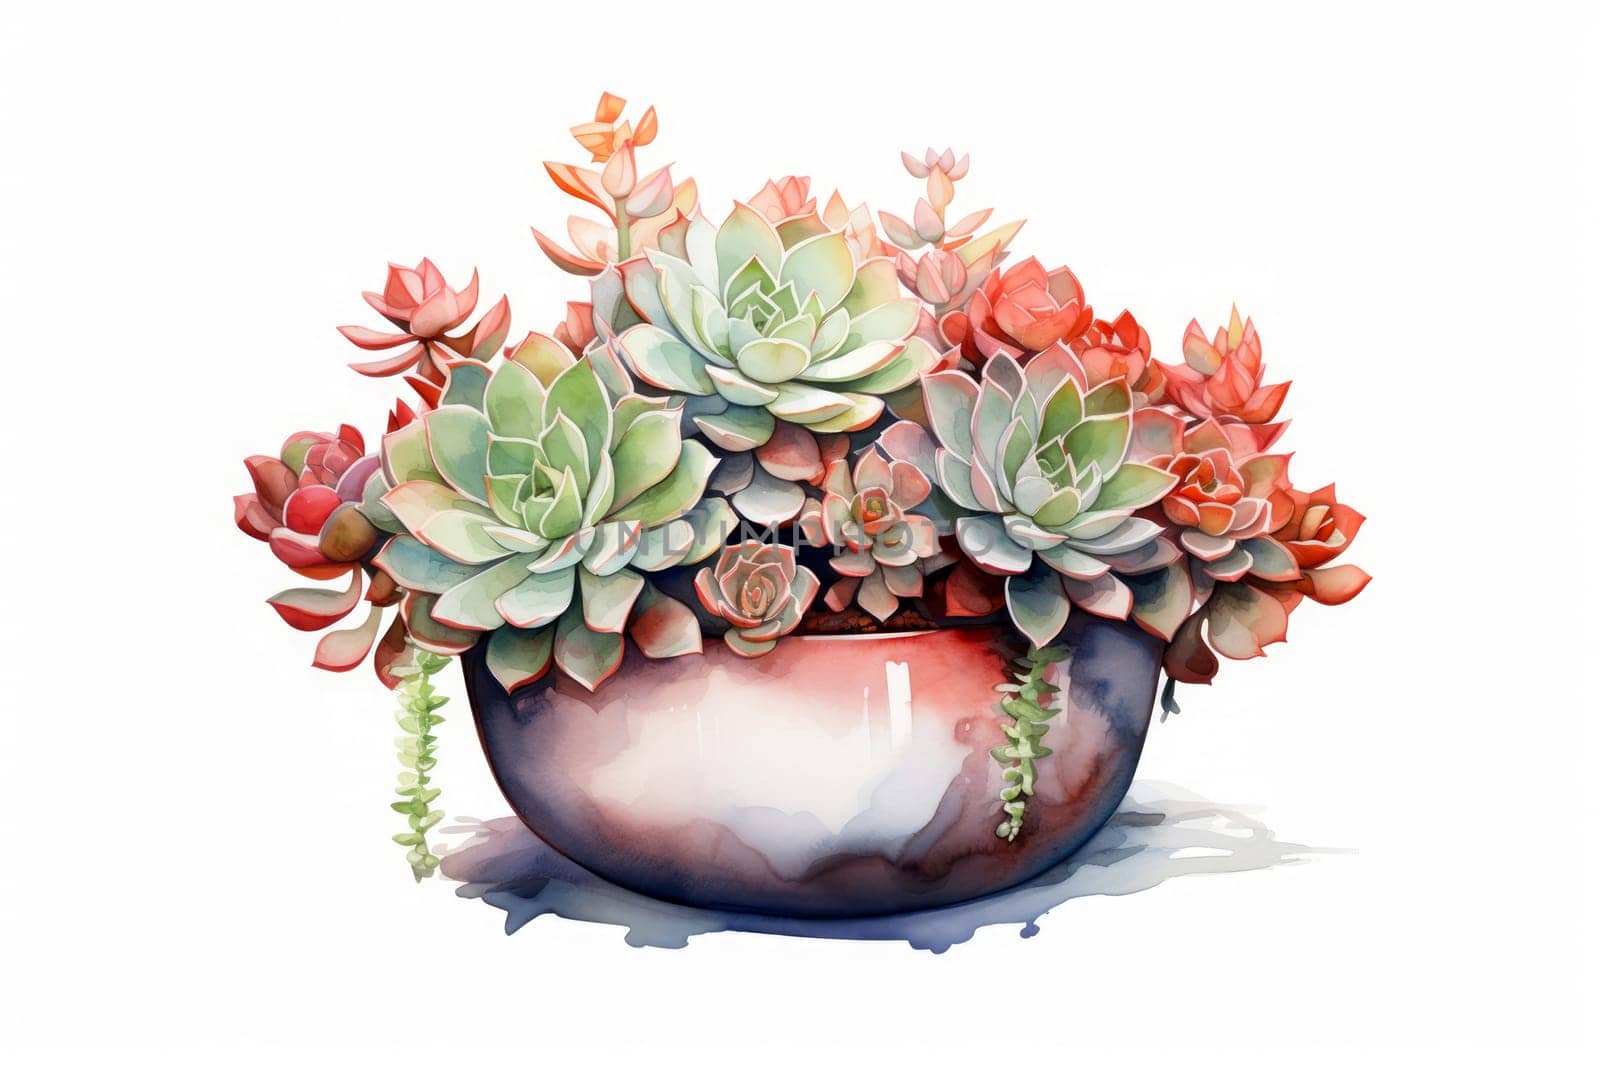 Succulents in a pot on a white background, watercolor image by Ramanouskaya